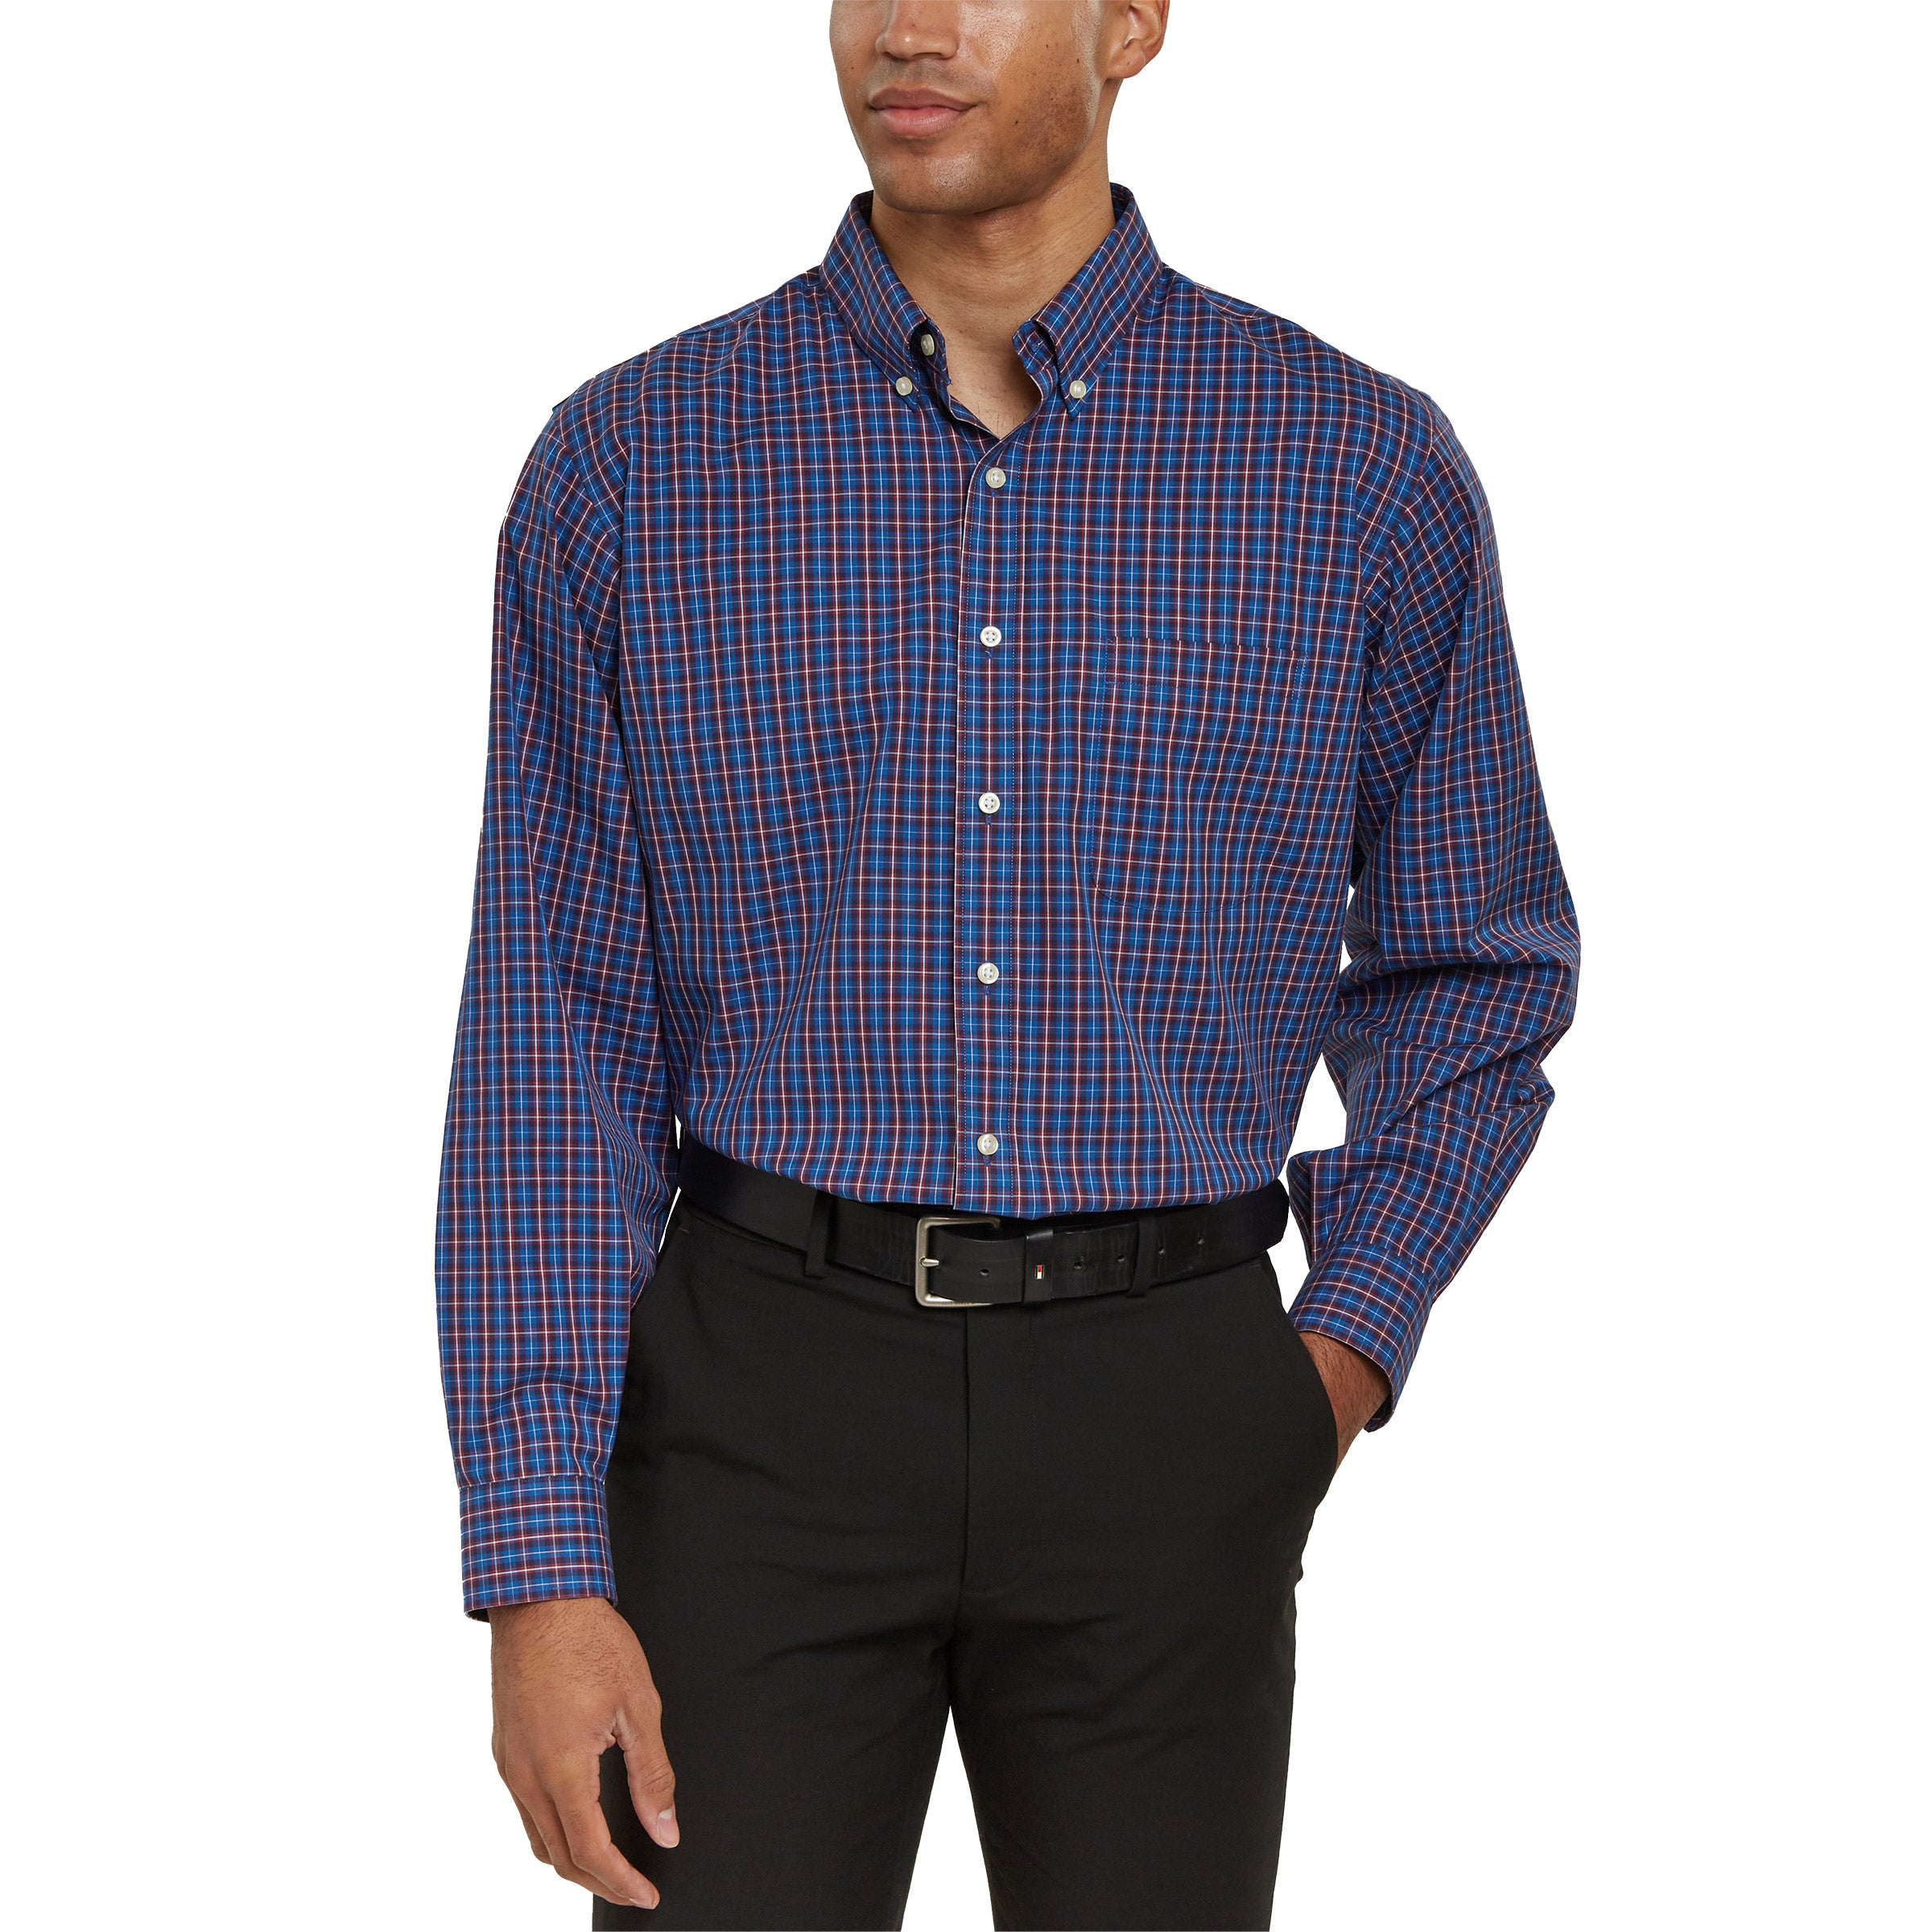 Men’S Traditional Fit Dress Shirt, Navy Blue Red Check